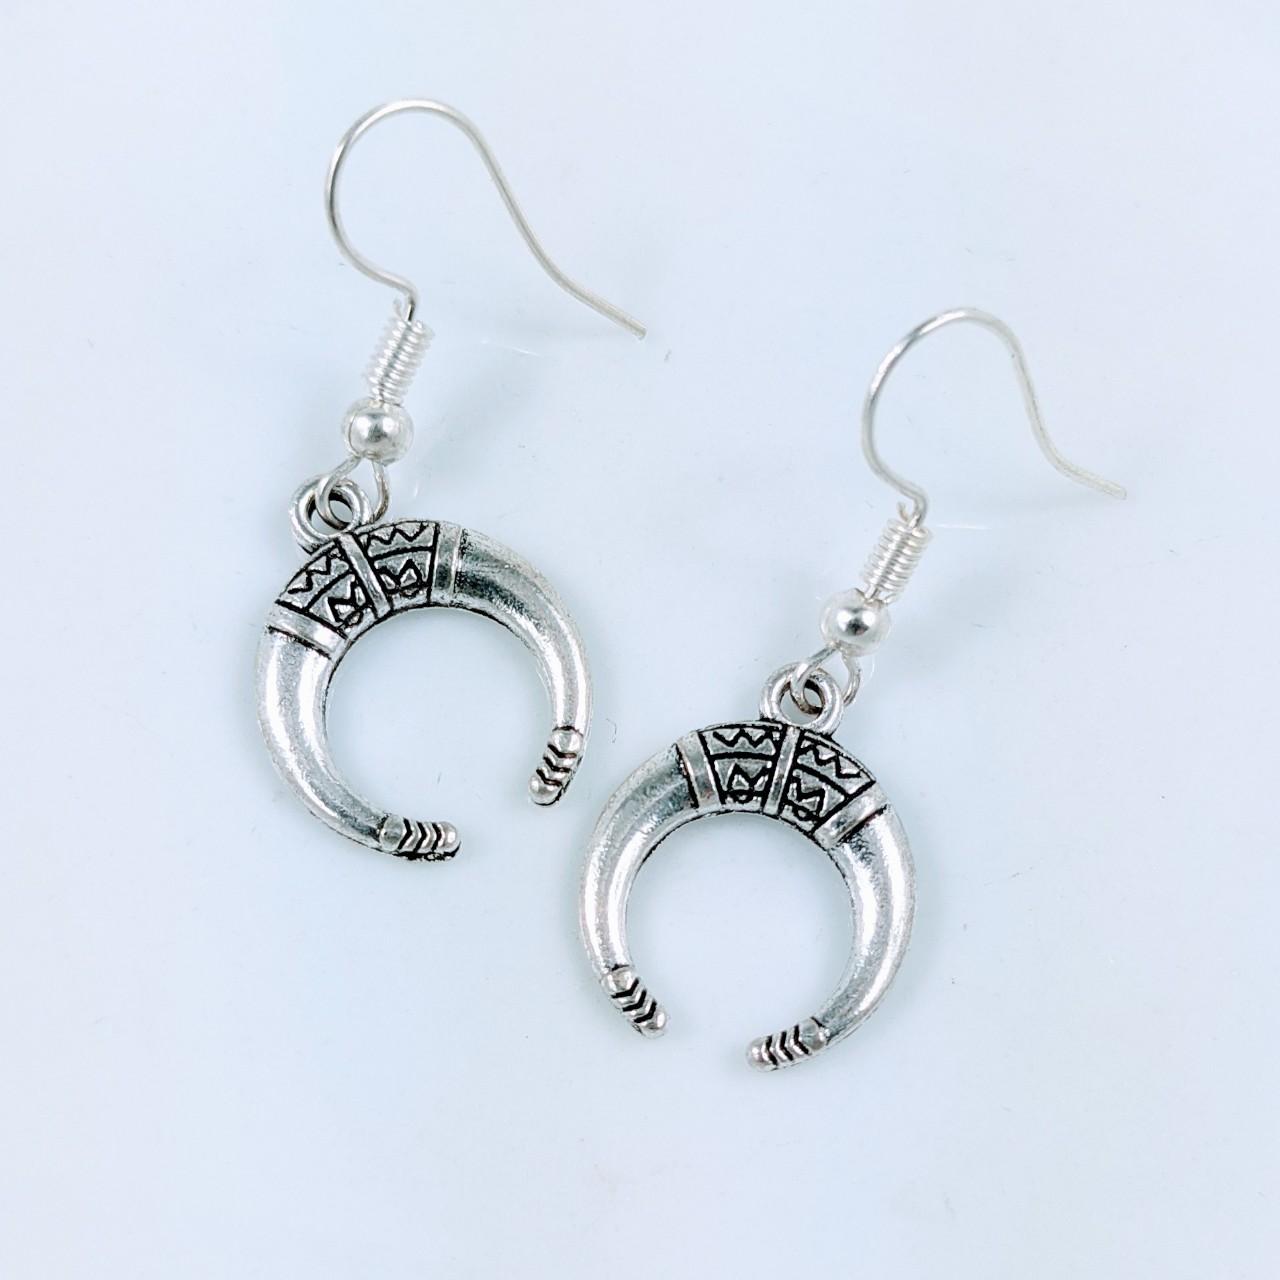 Product Image 1 - Moon Horn Earrings
Brand new. 

Made